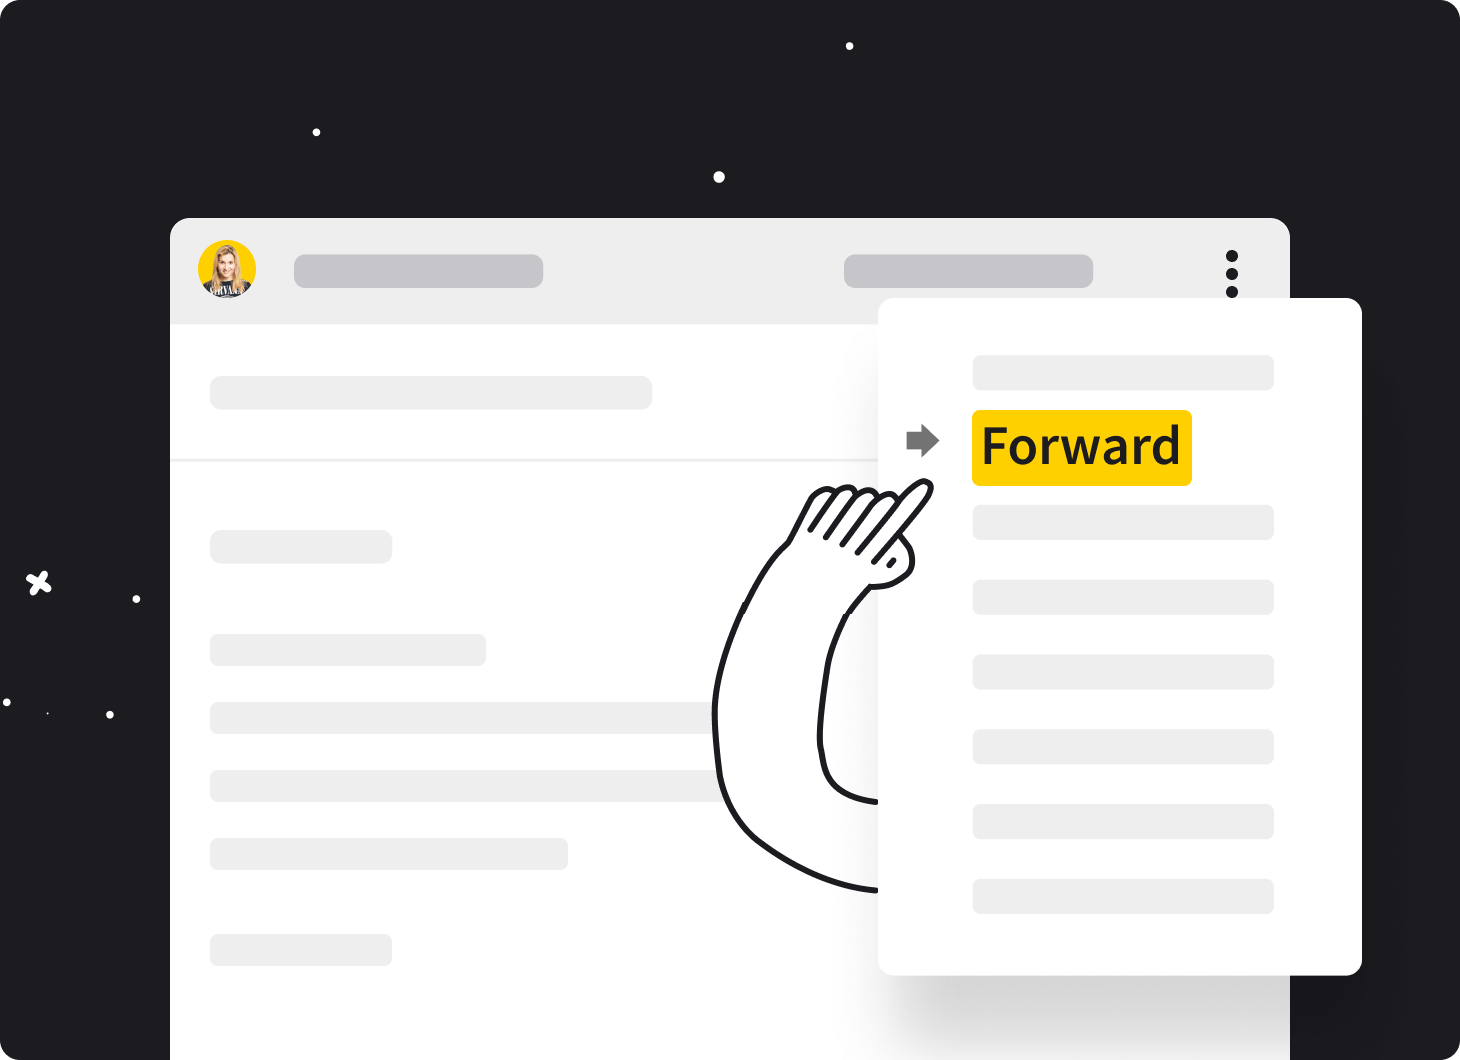 Email window with the hand pointing to the ‘Forward’ button.